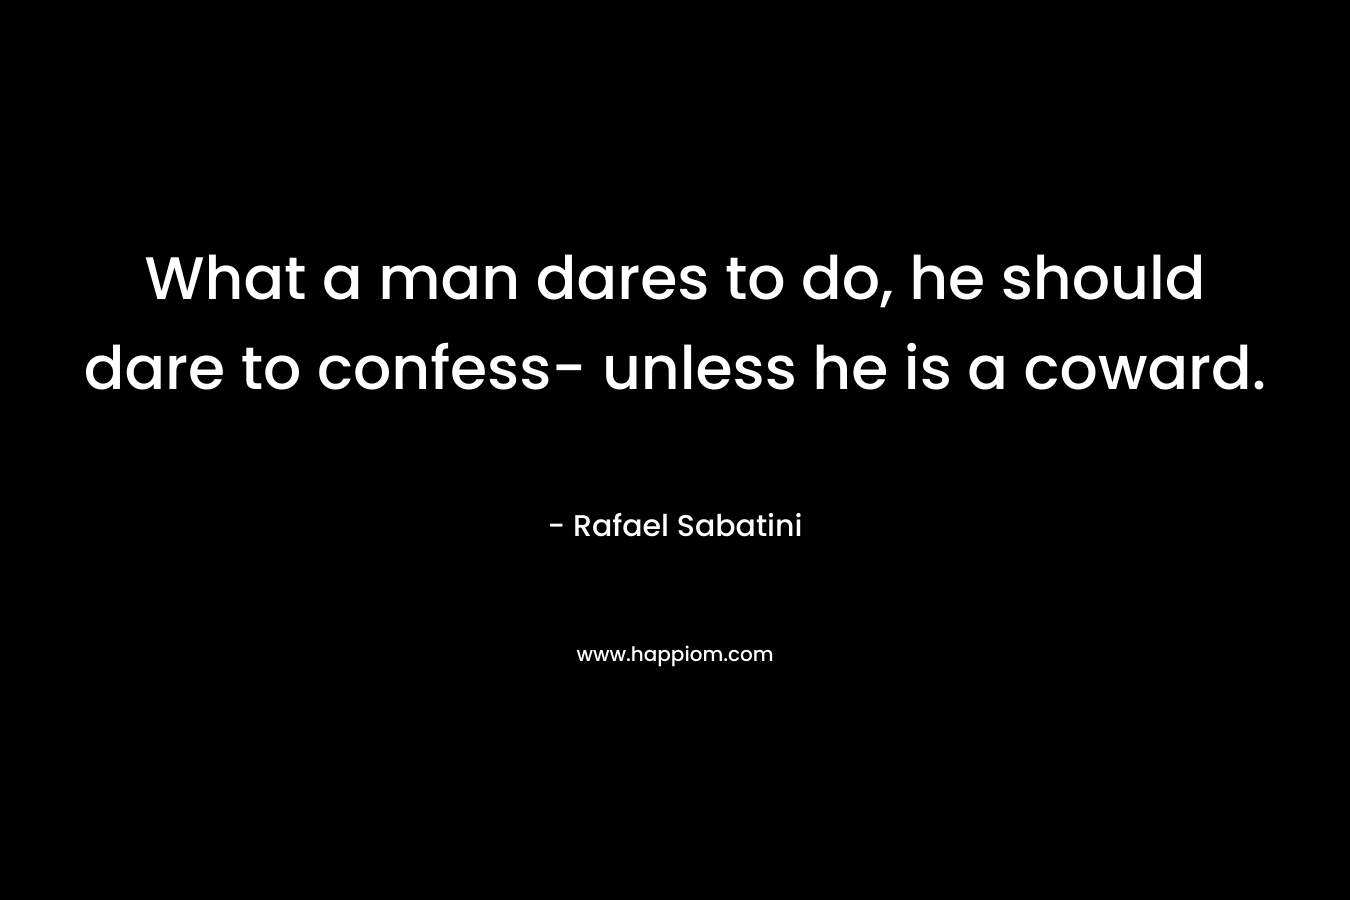 What a man dares to do, he should dare to confess- unless he is a coward. – Rafael Sabatini